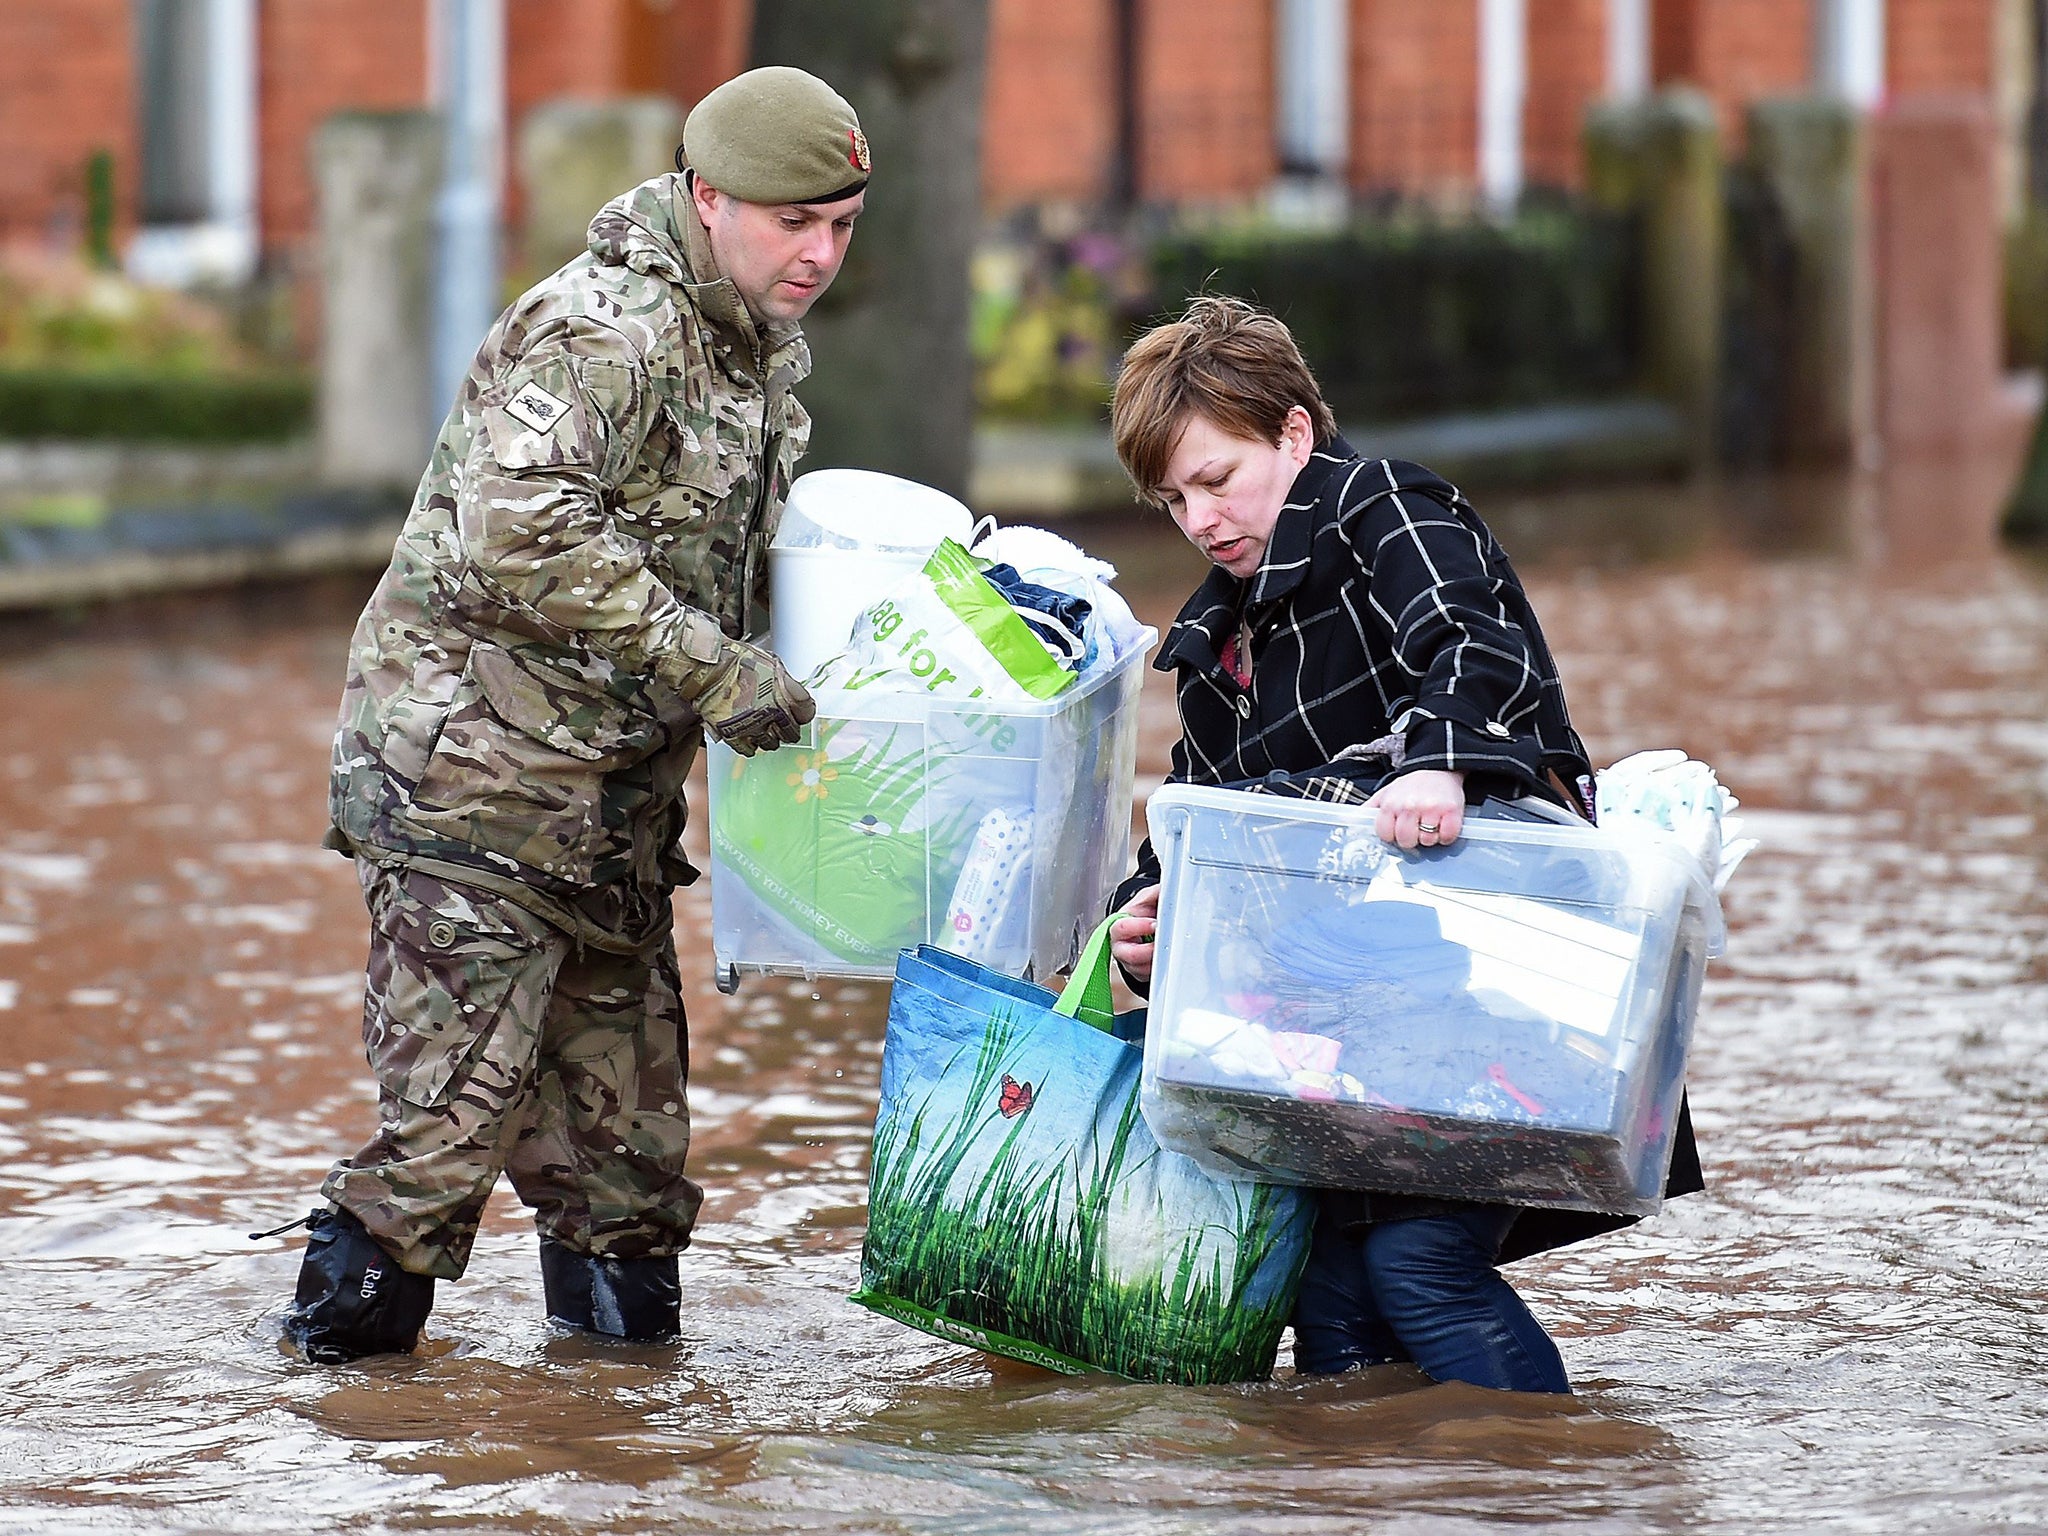 A member of the British army helps a woman carry belongings through a flooded street in Carlisle